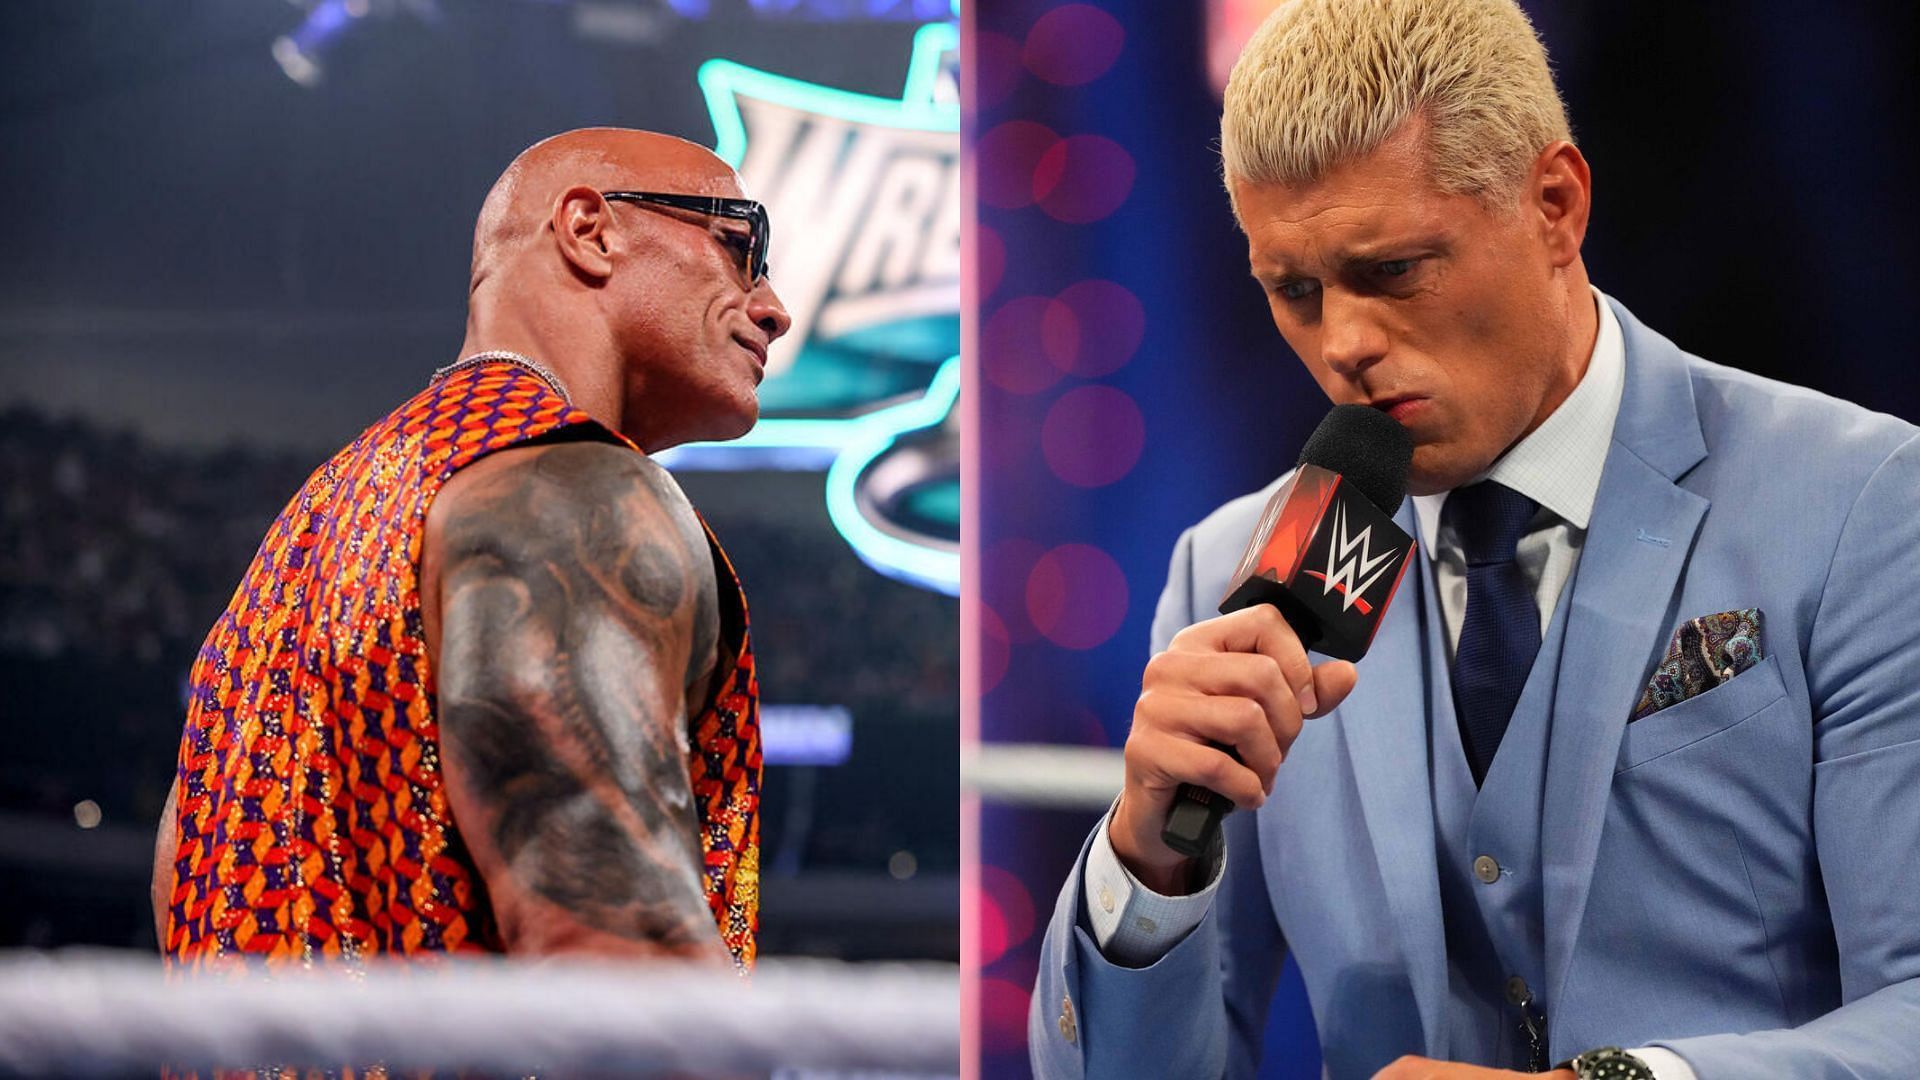 The Rock and Cody Rhodes are set to face each other in tag team action at WWE WrestleMania